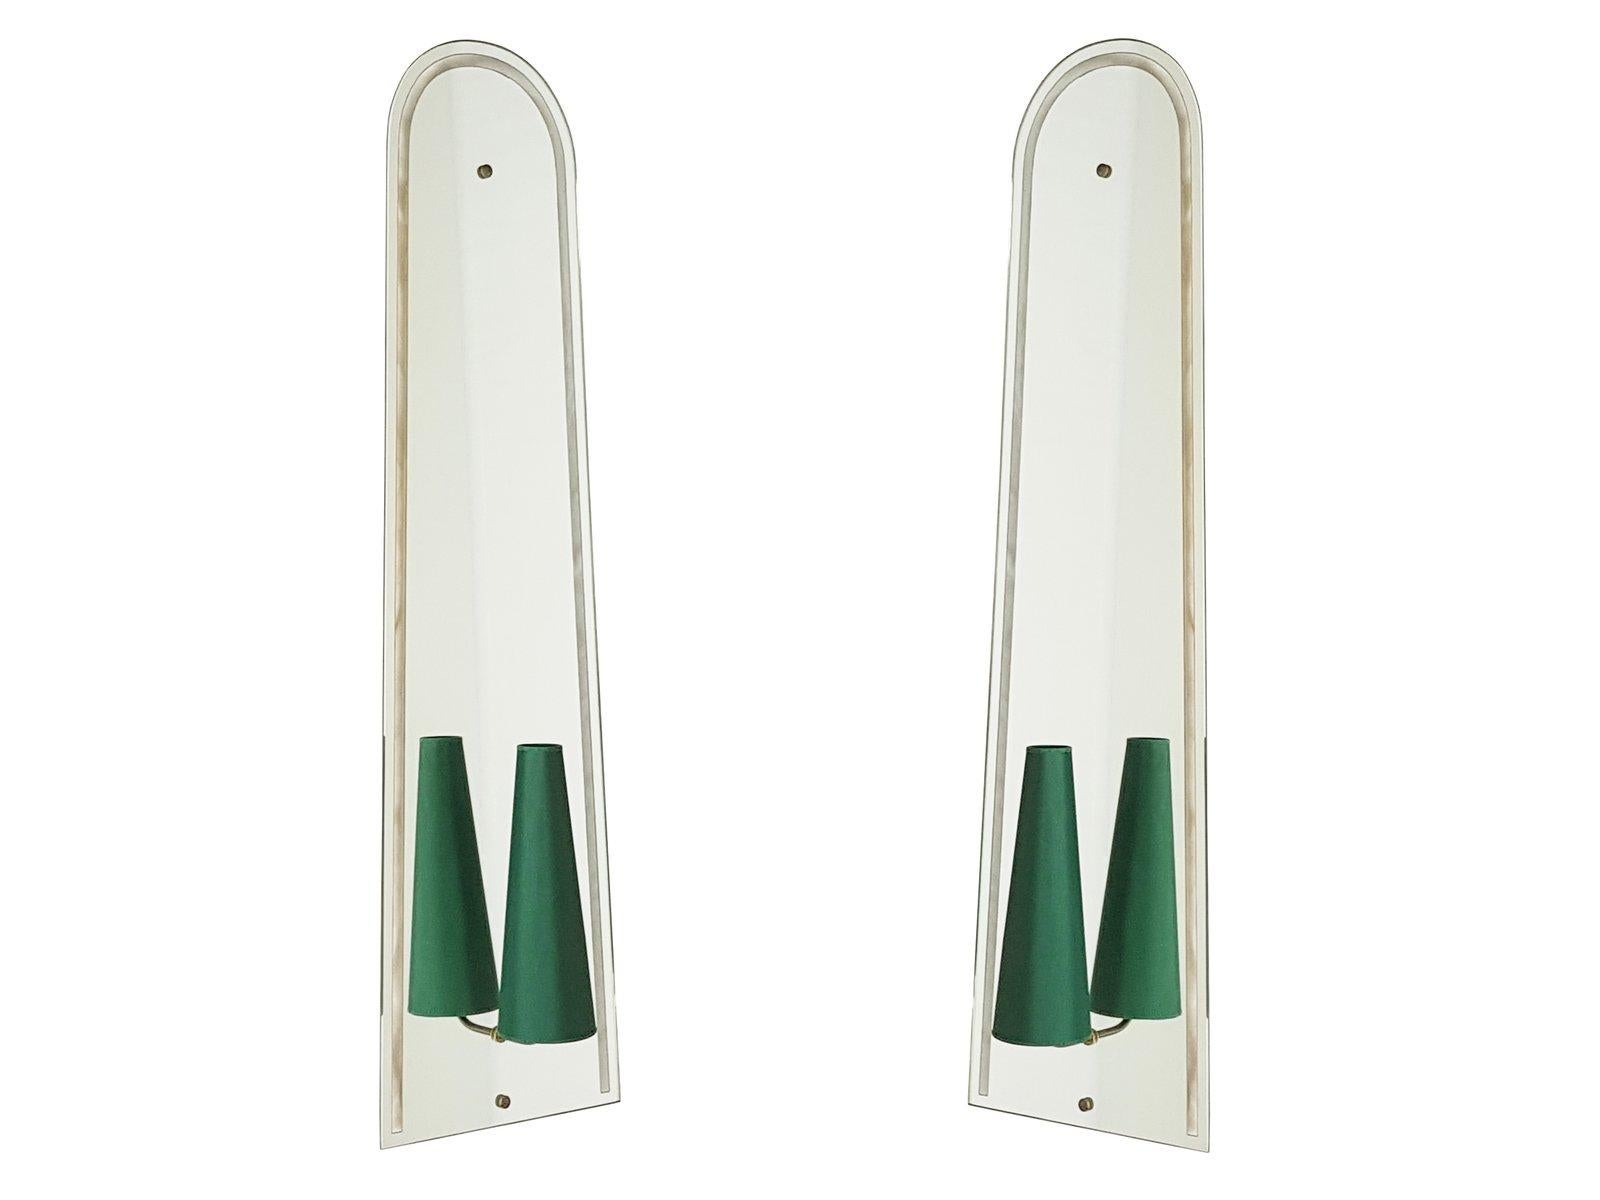 This pair of huge wall lights was produced in Italy, circa 1950s. A solid wooden frame supports the shaped mirrored glass with a clear glass decoration frame. At the bottom, a thin brass arm support the light bulb holder and its related green fabric